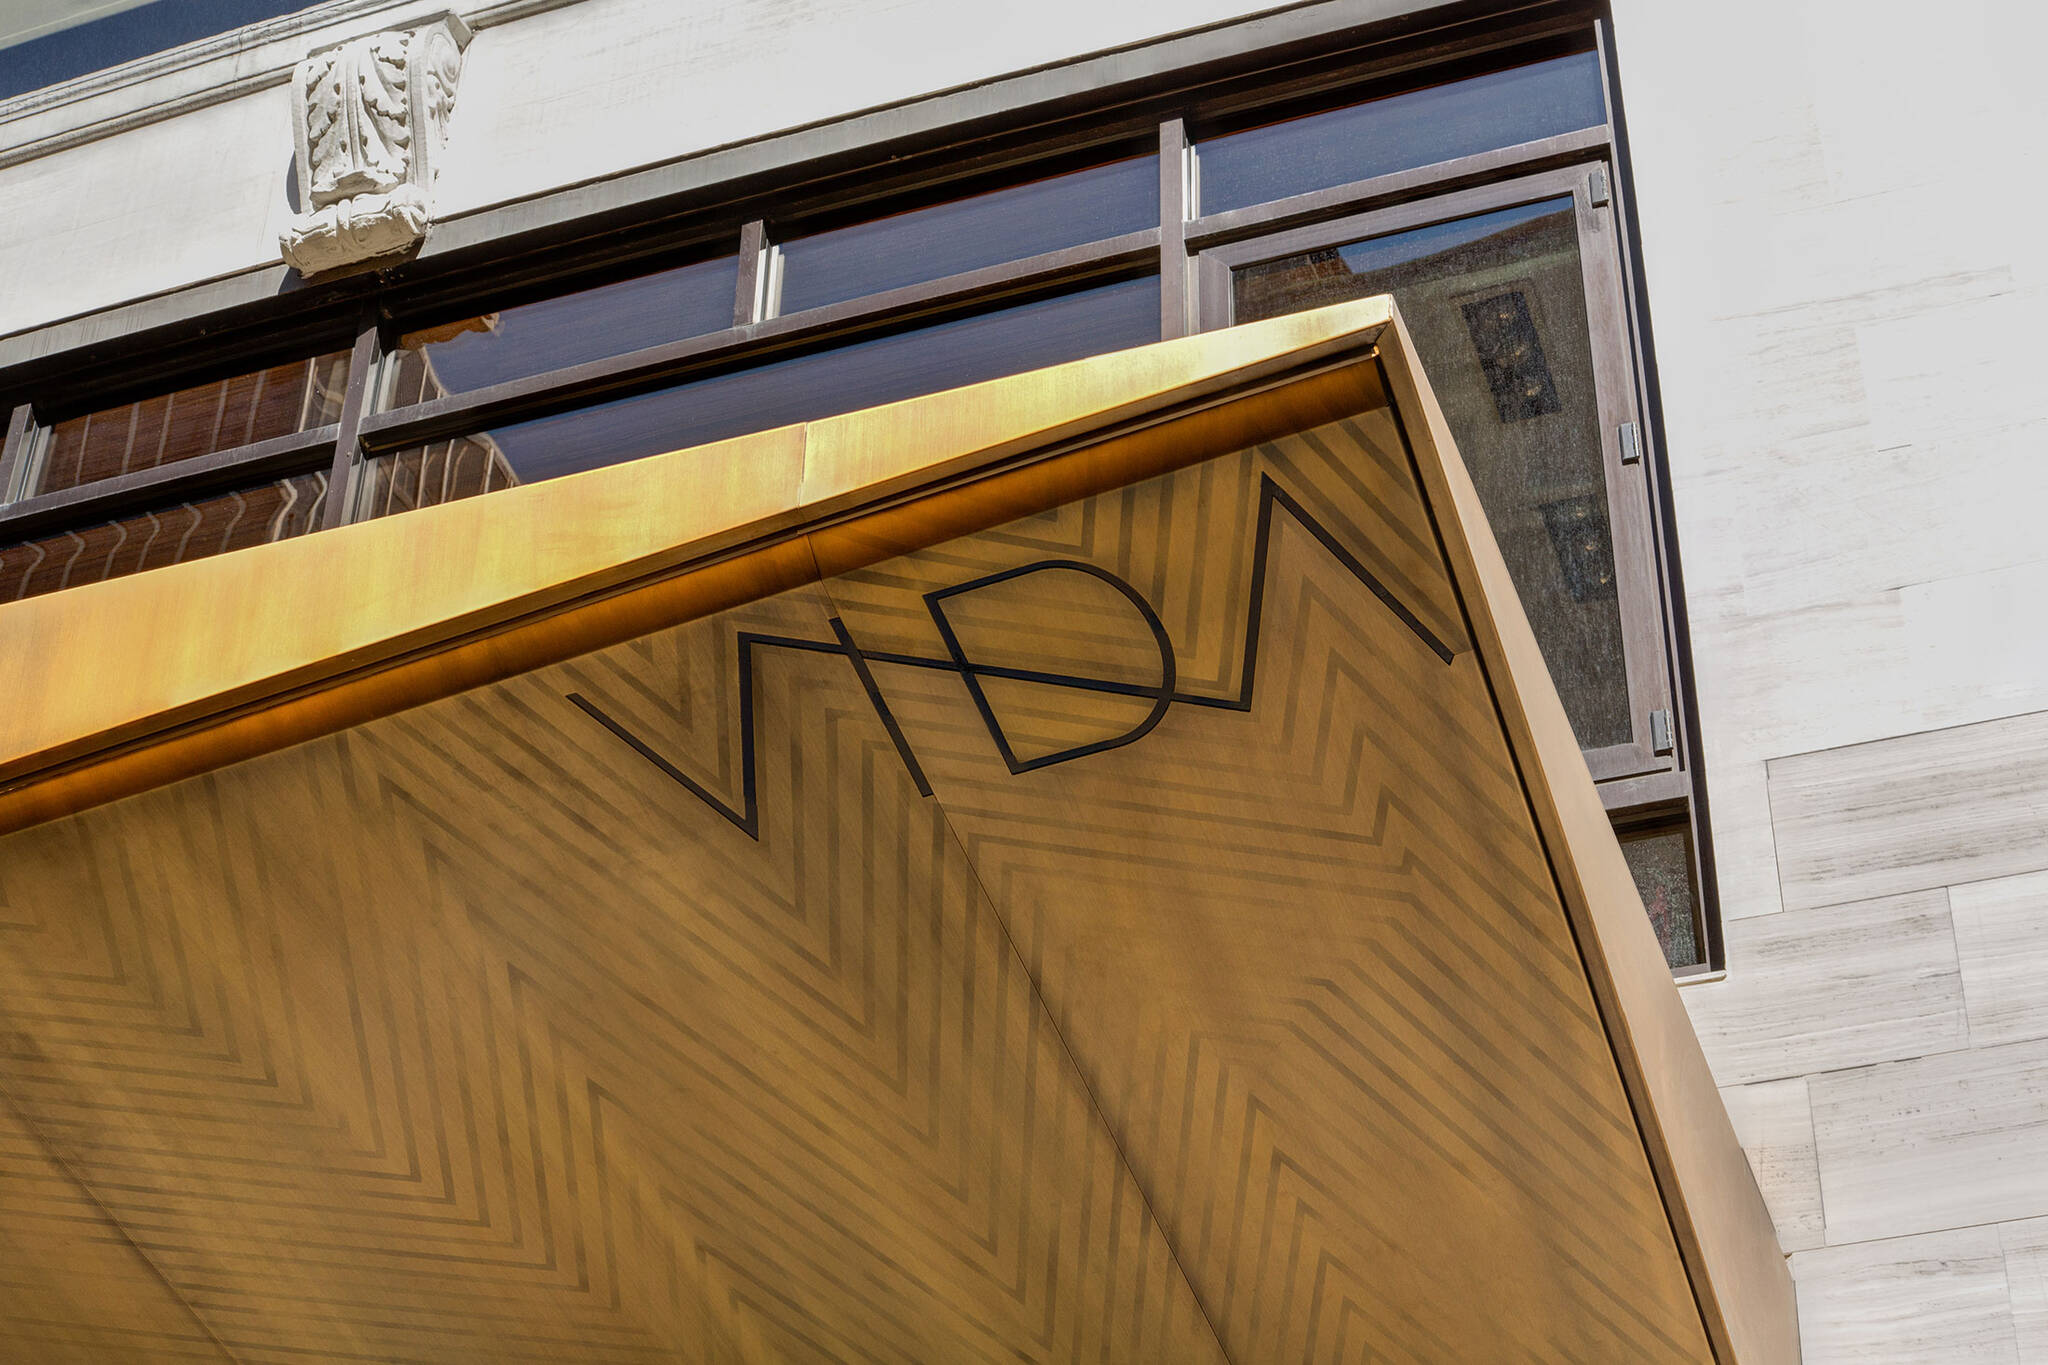 Branding on the corner of the Vida Shoes International canopy project for the shop located at 29 West 56th Street in Midtown, New York City designed by the architecture studio Danny Forster & Architecture